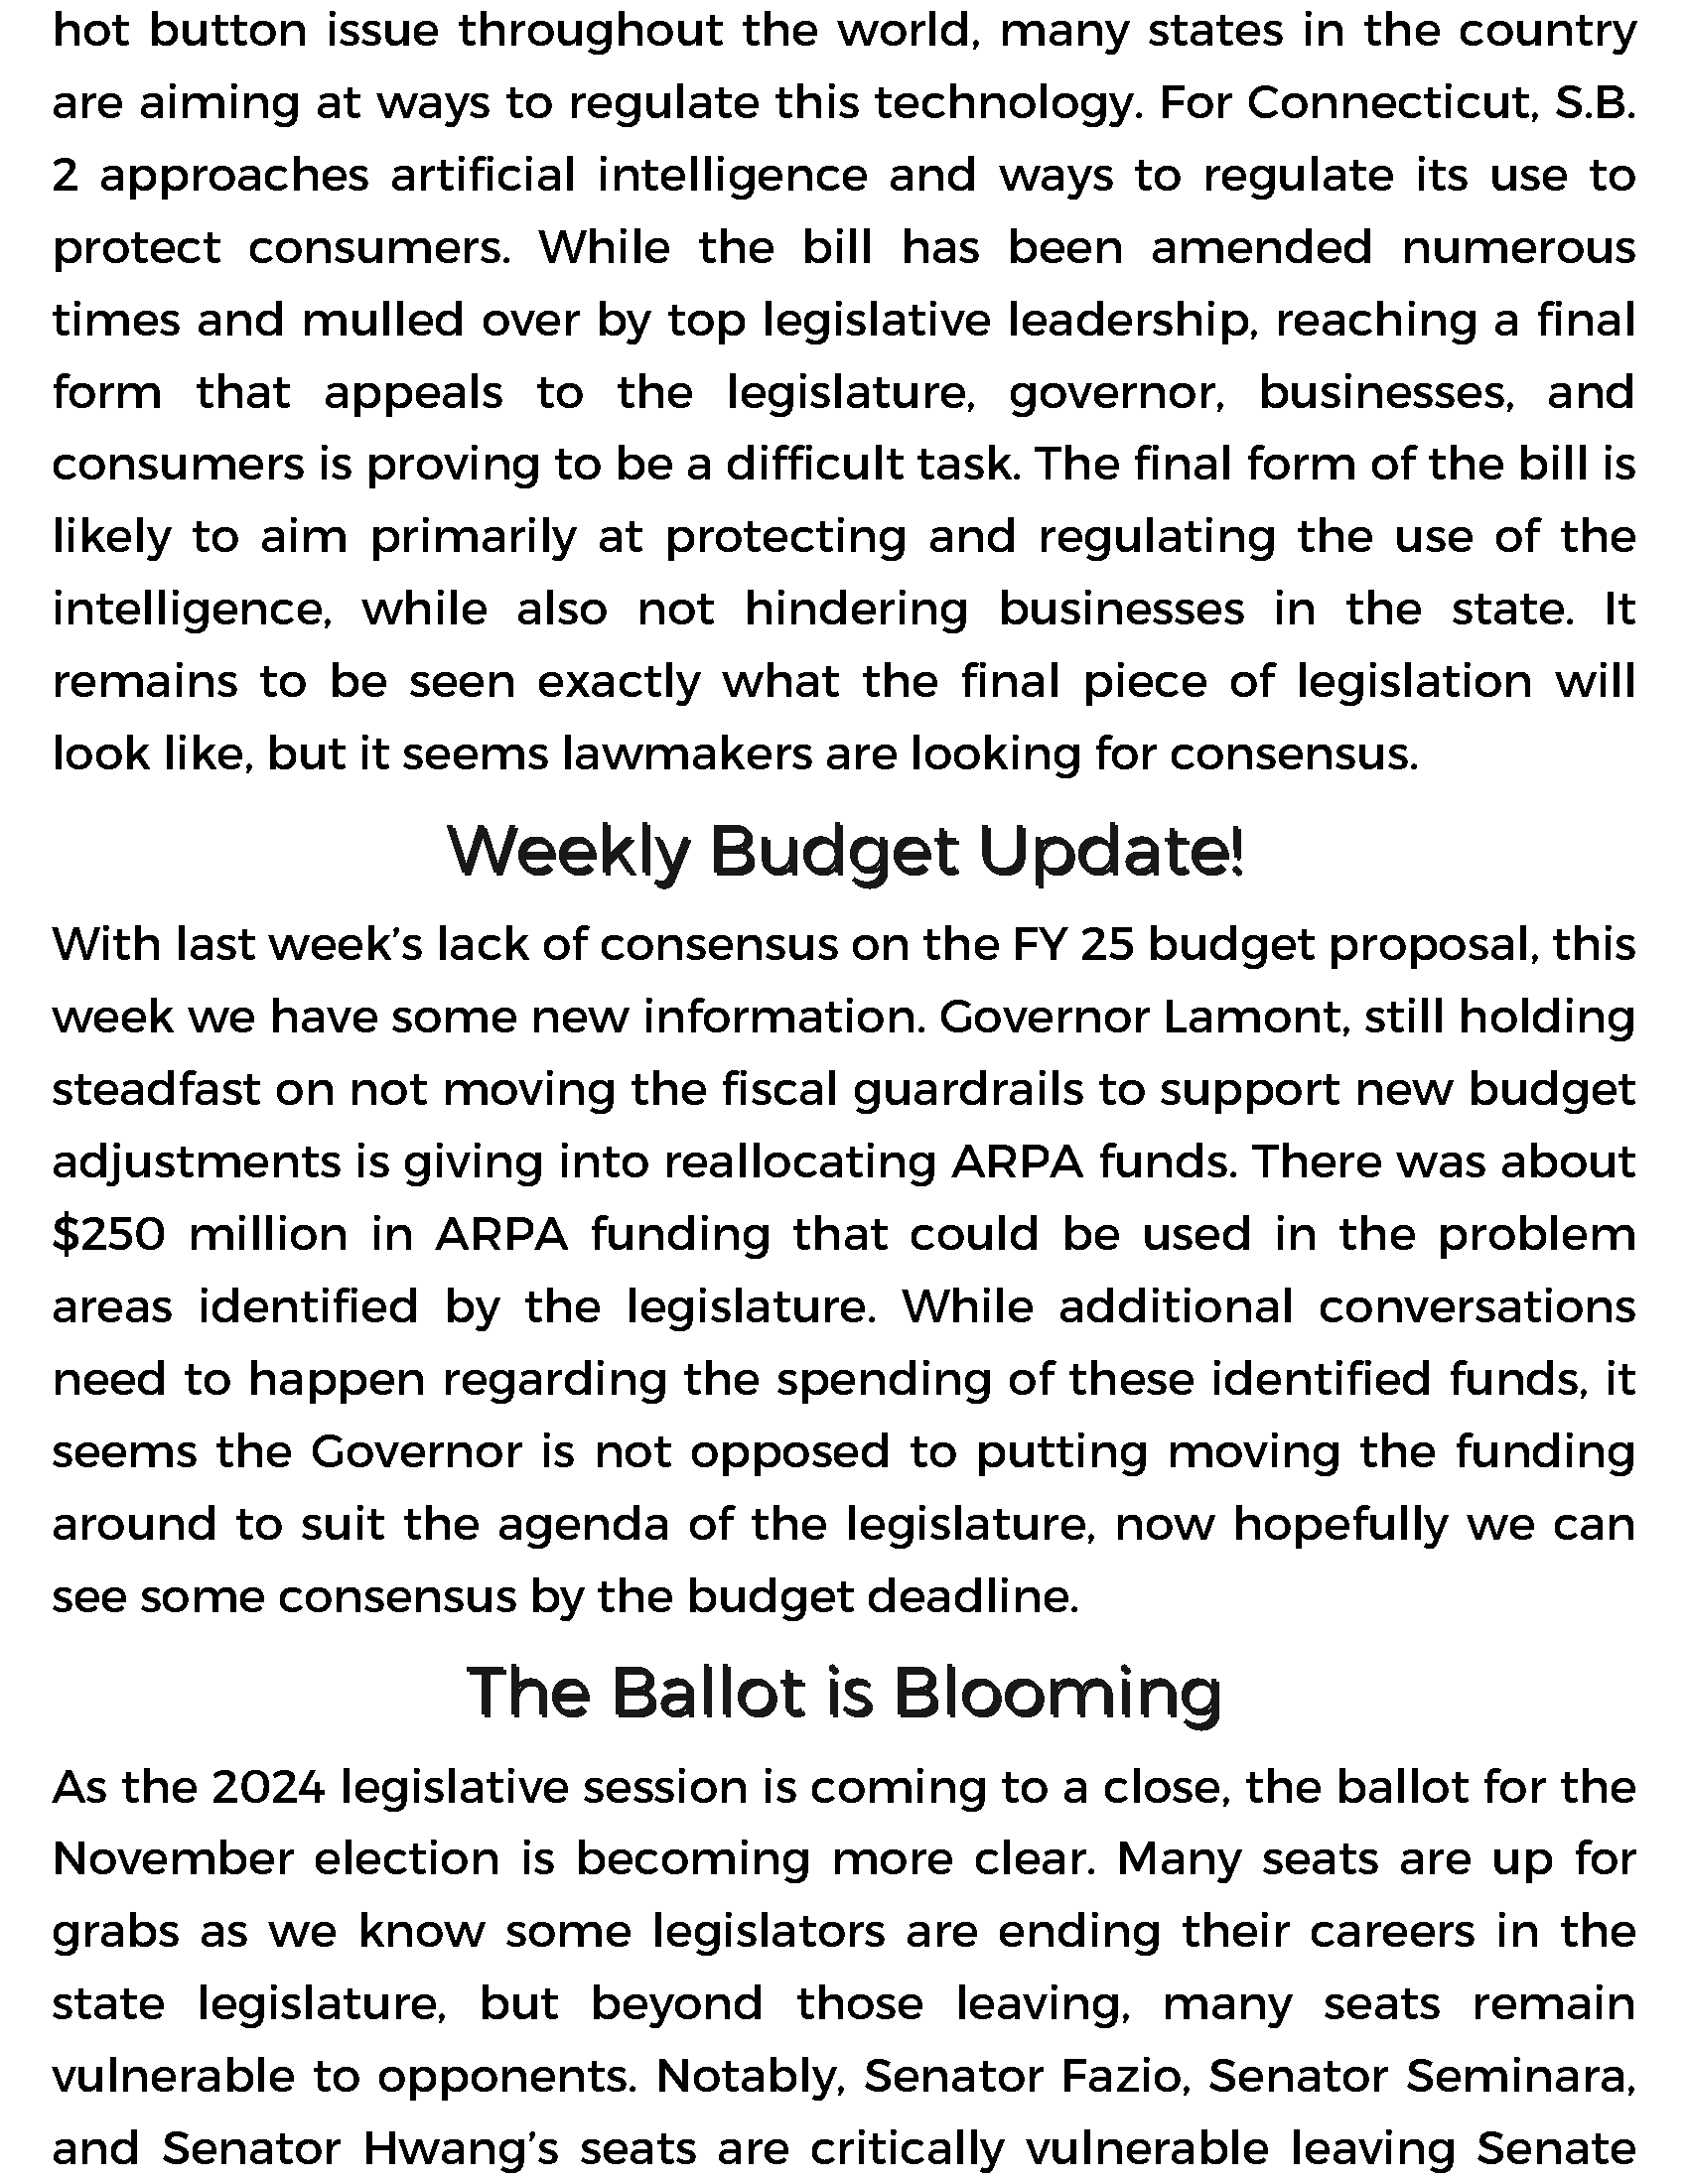 Weekly Newsletter  (1)_Page_2.png